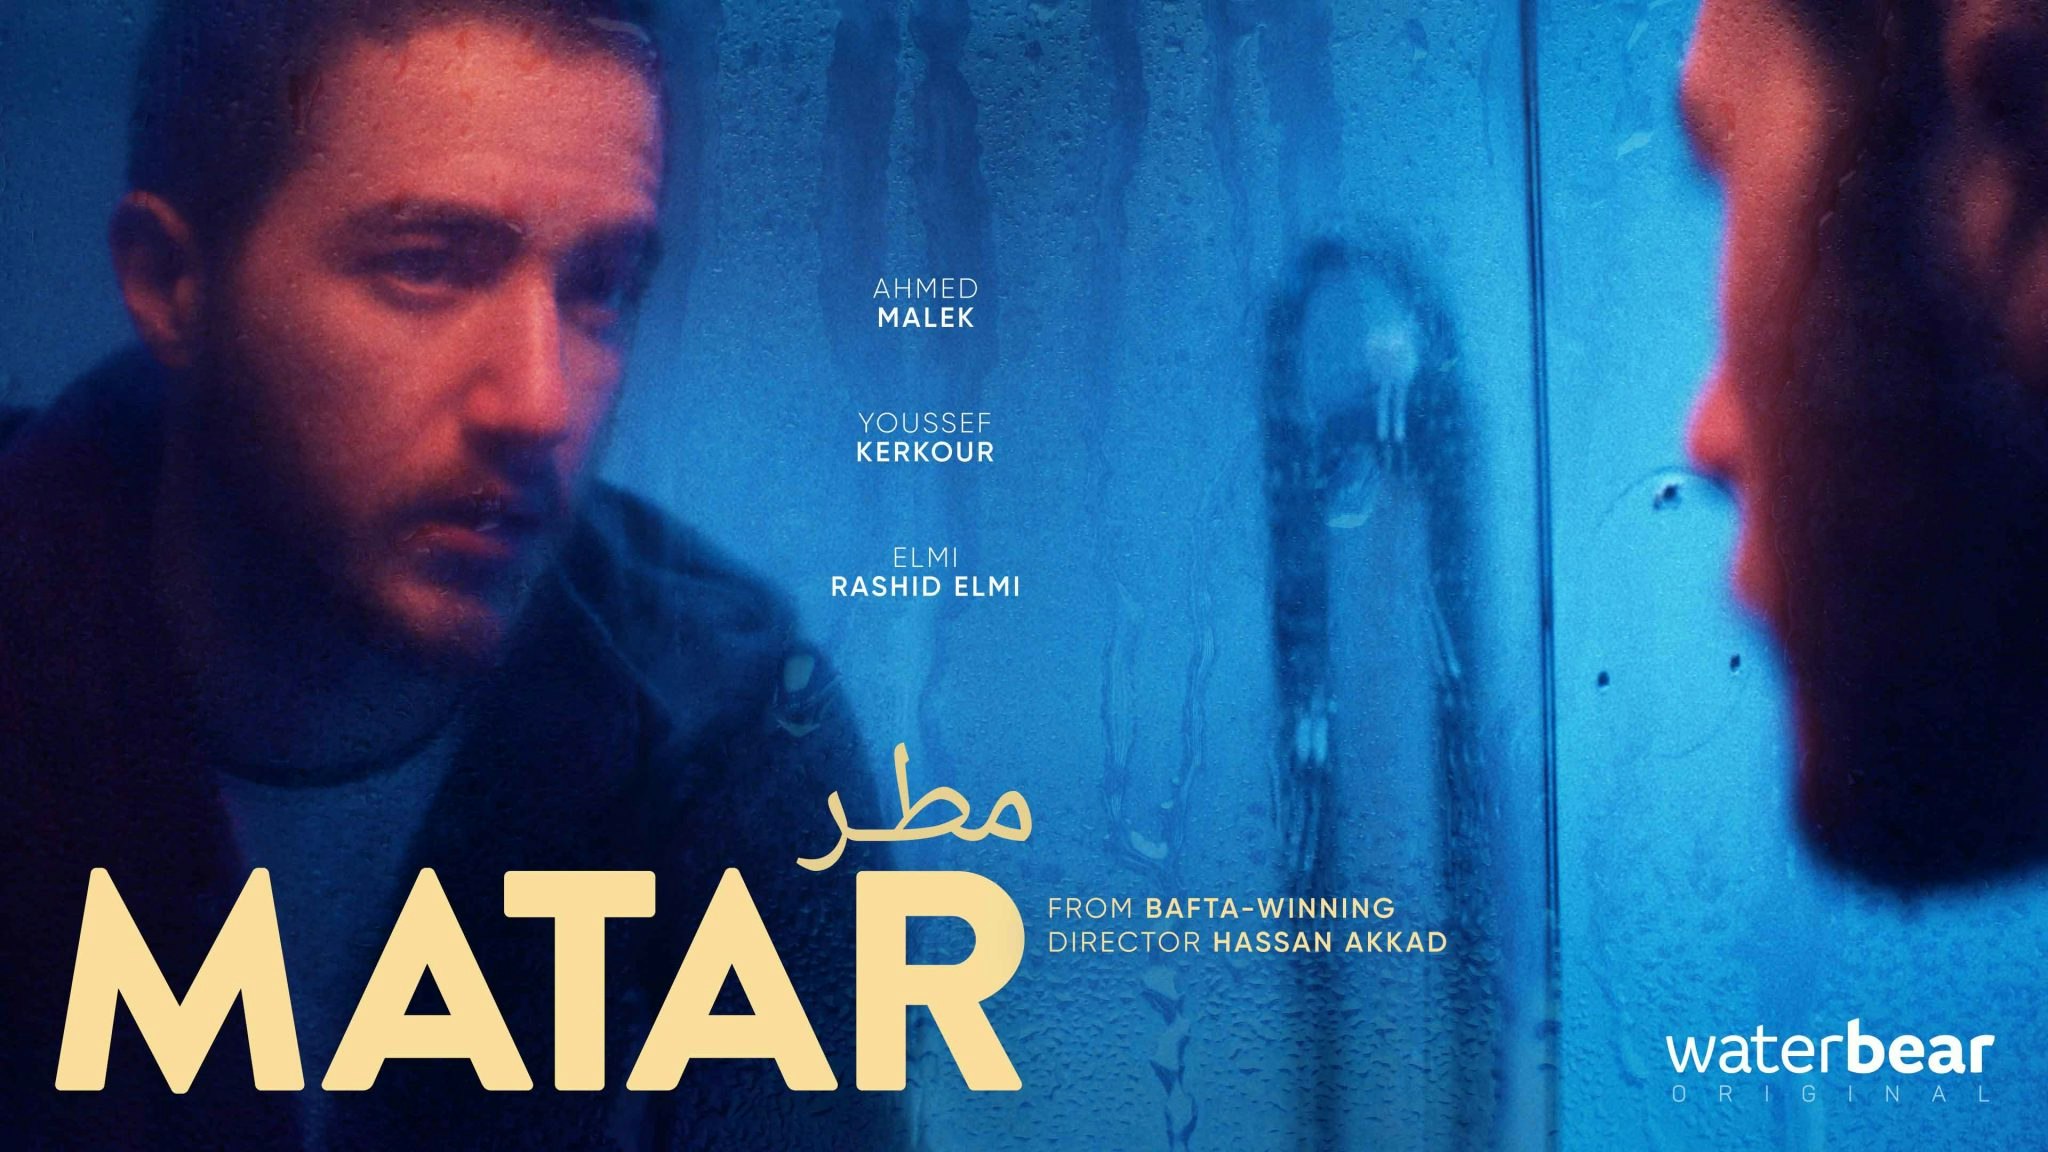 A movie poster for Matar, which was released on WaterBear.